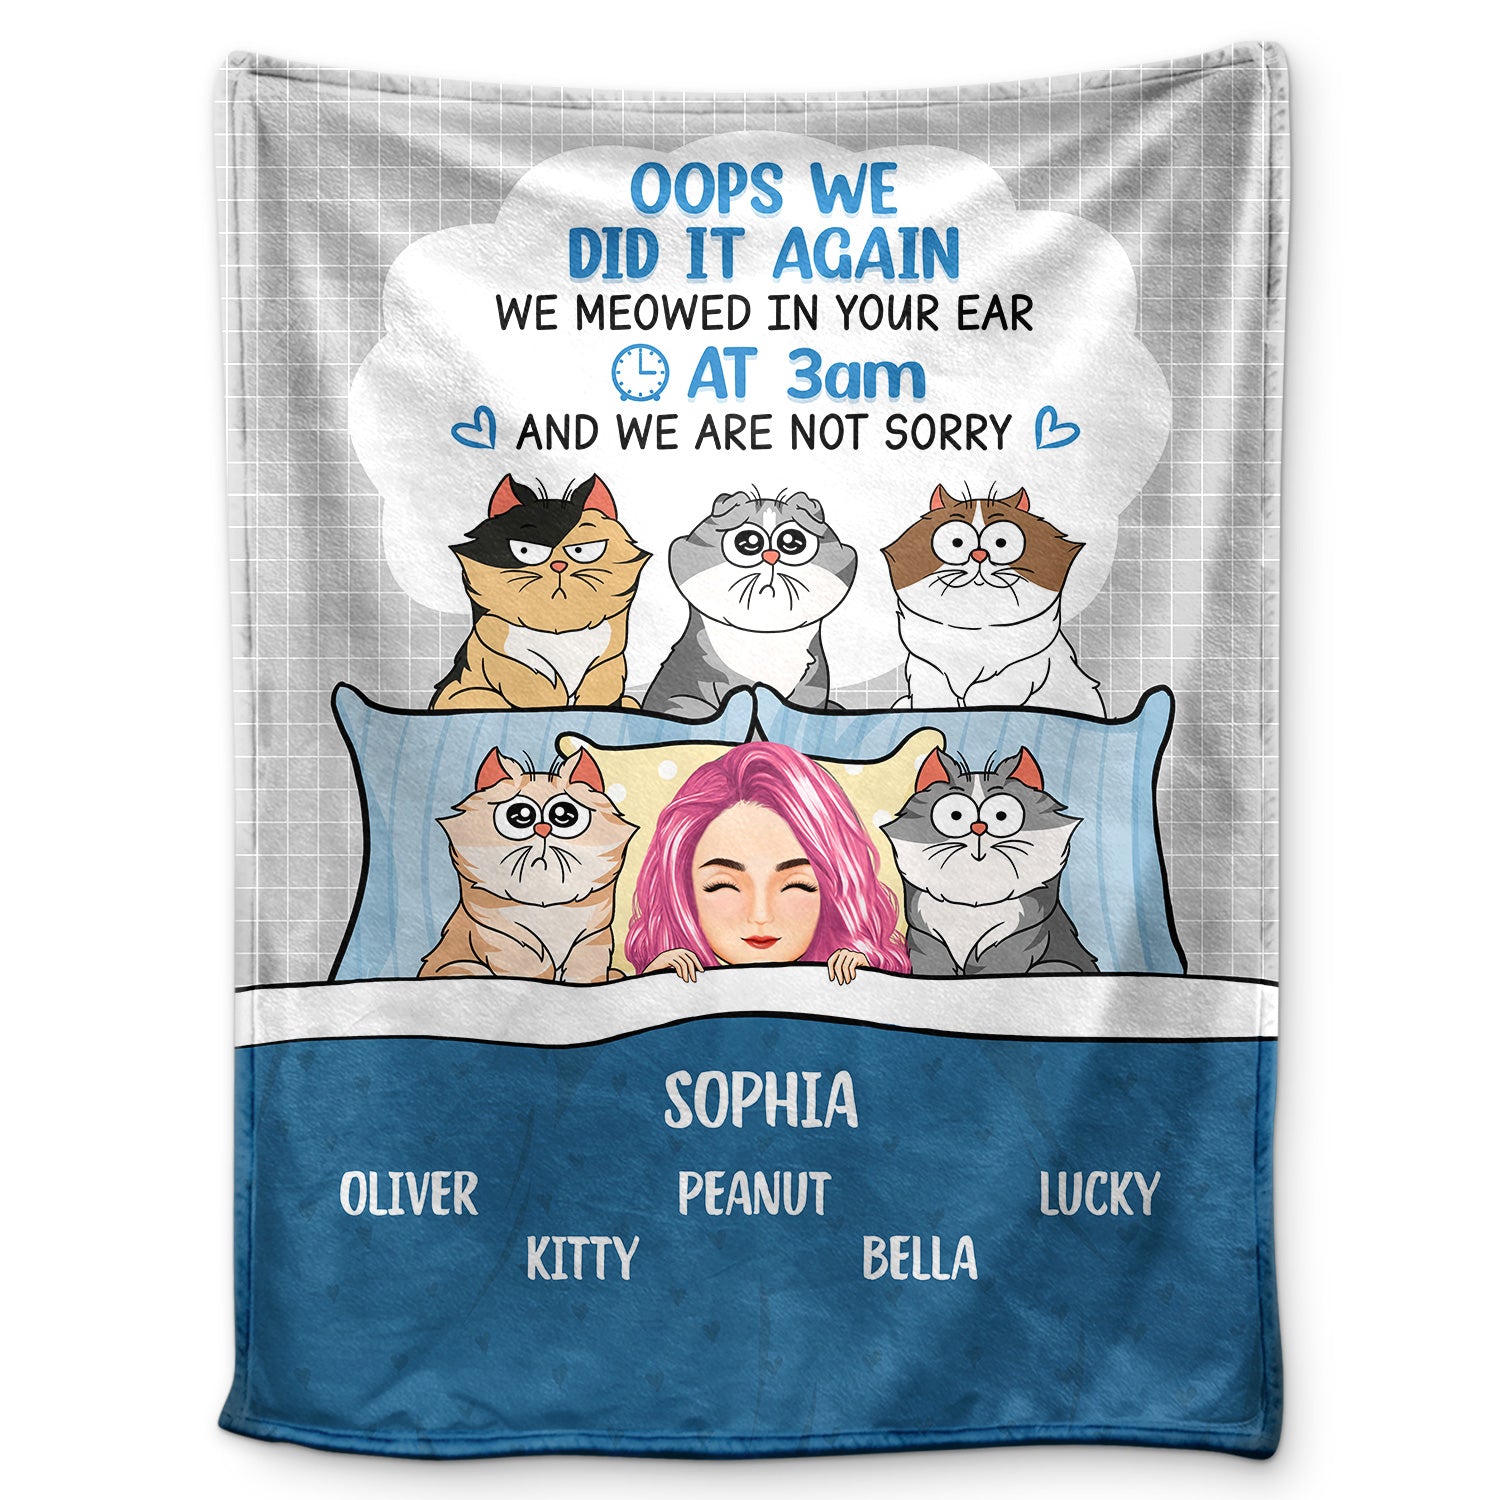 We Meowed In Your Ear At 3am - Gift For Cat Lovers - Personalized Fleece Blanket, Sherpa Blanket